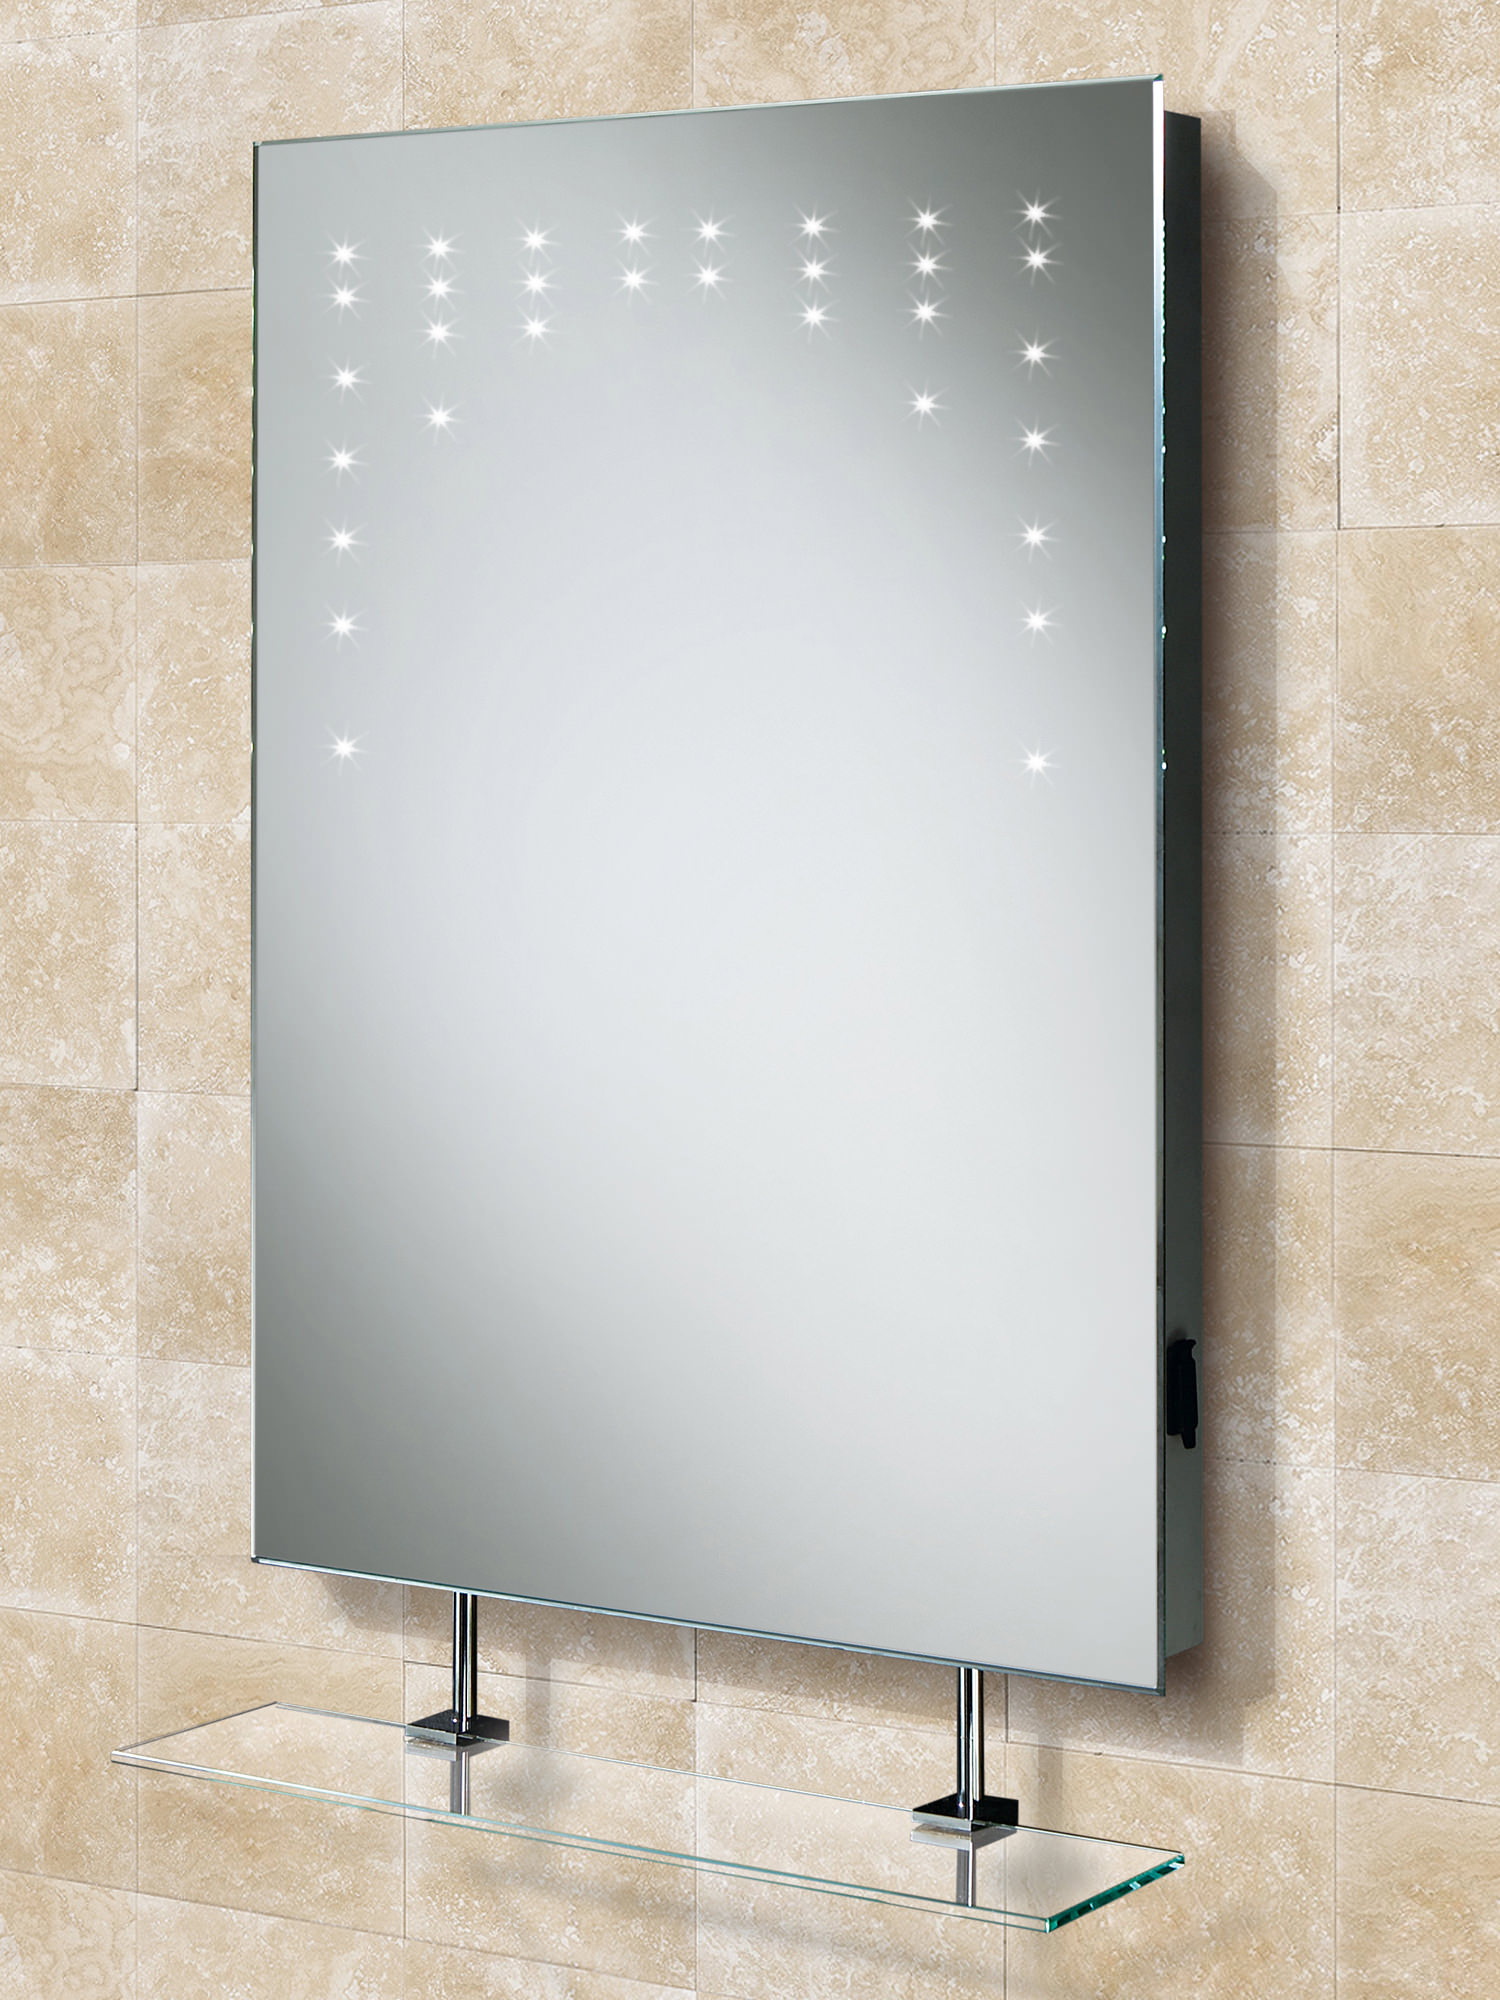 Bathroom Mirrors With Shaver Socket With Beautiful Inspirational  eyagci.com